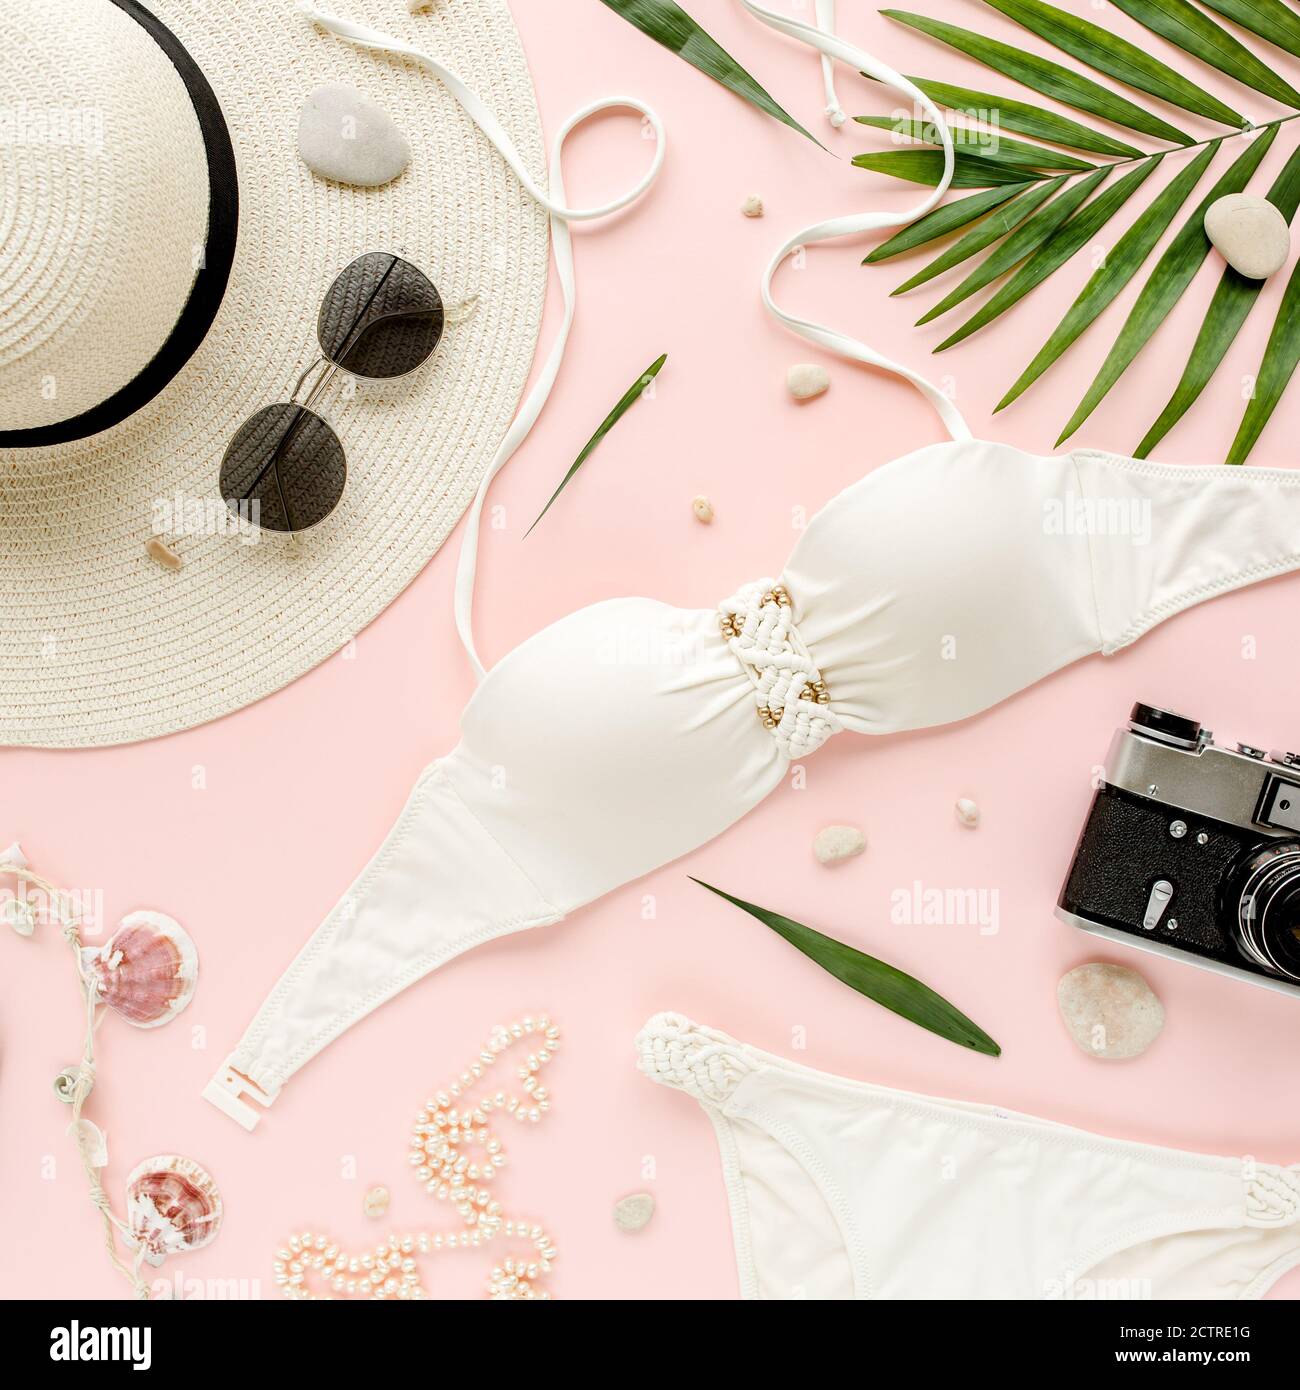 Traveler accessories, women summer bikini set swimsuit, tropical palm leaf branches on pink background. Travel vacation concept. Flat lay, top view.  Stock Photo